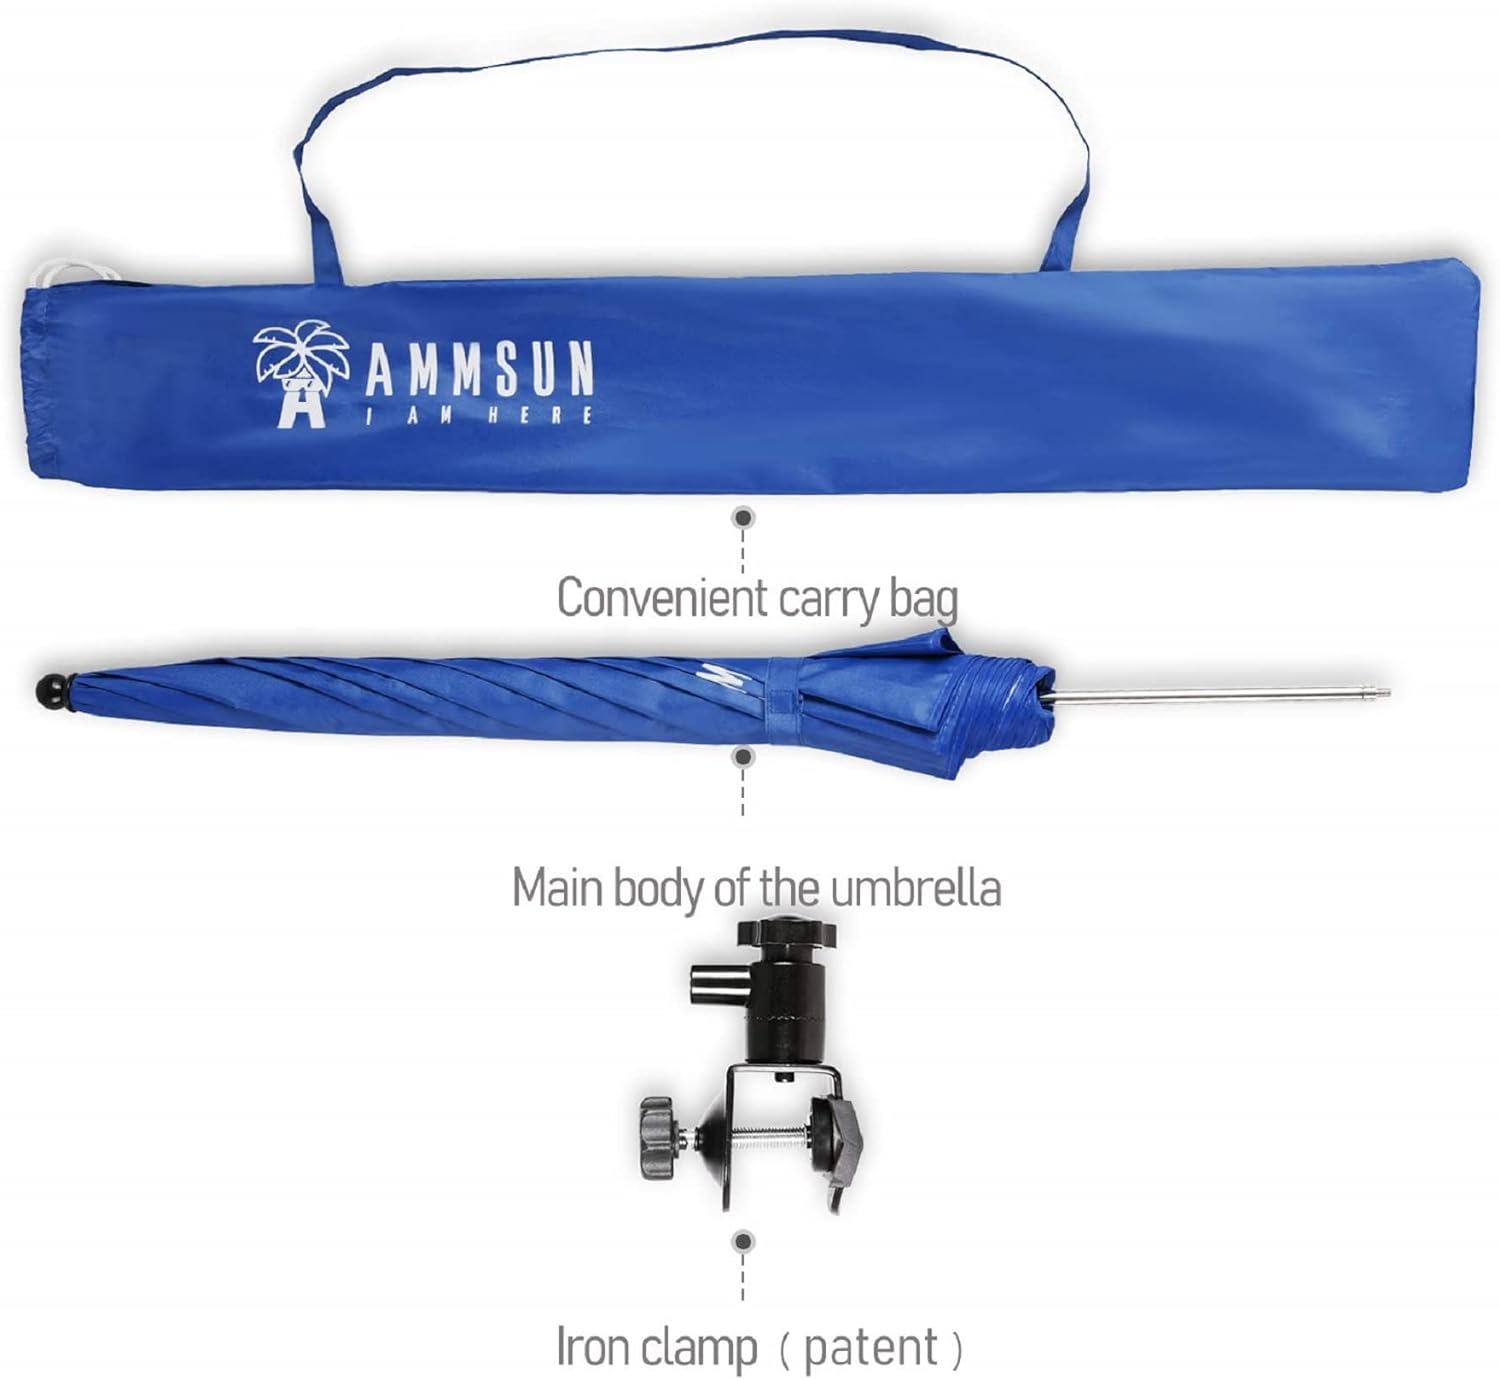 AMMSUN 43 inches Chair Umbrella with Universal Clamp Blue